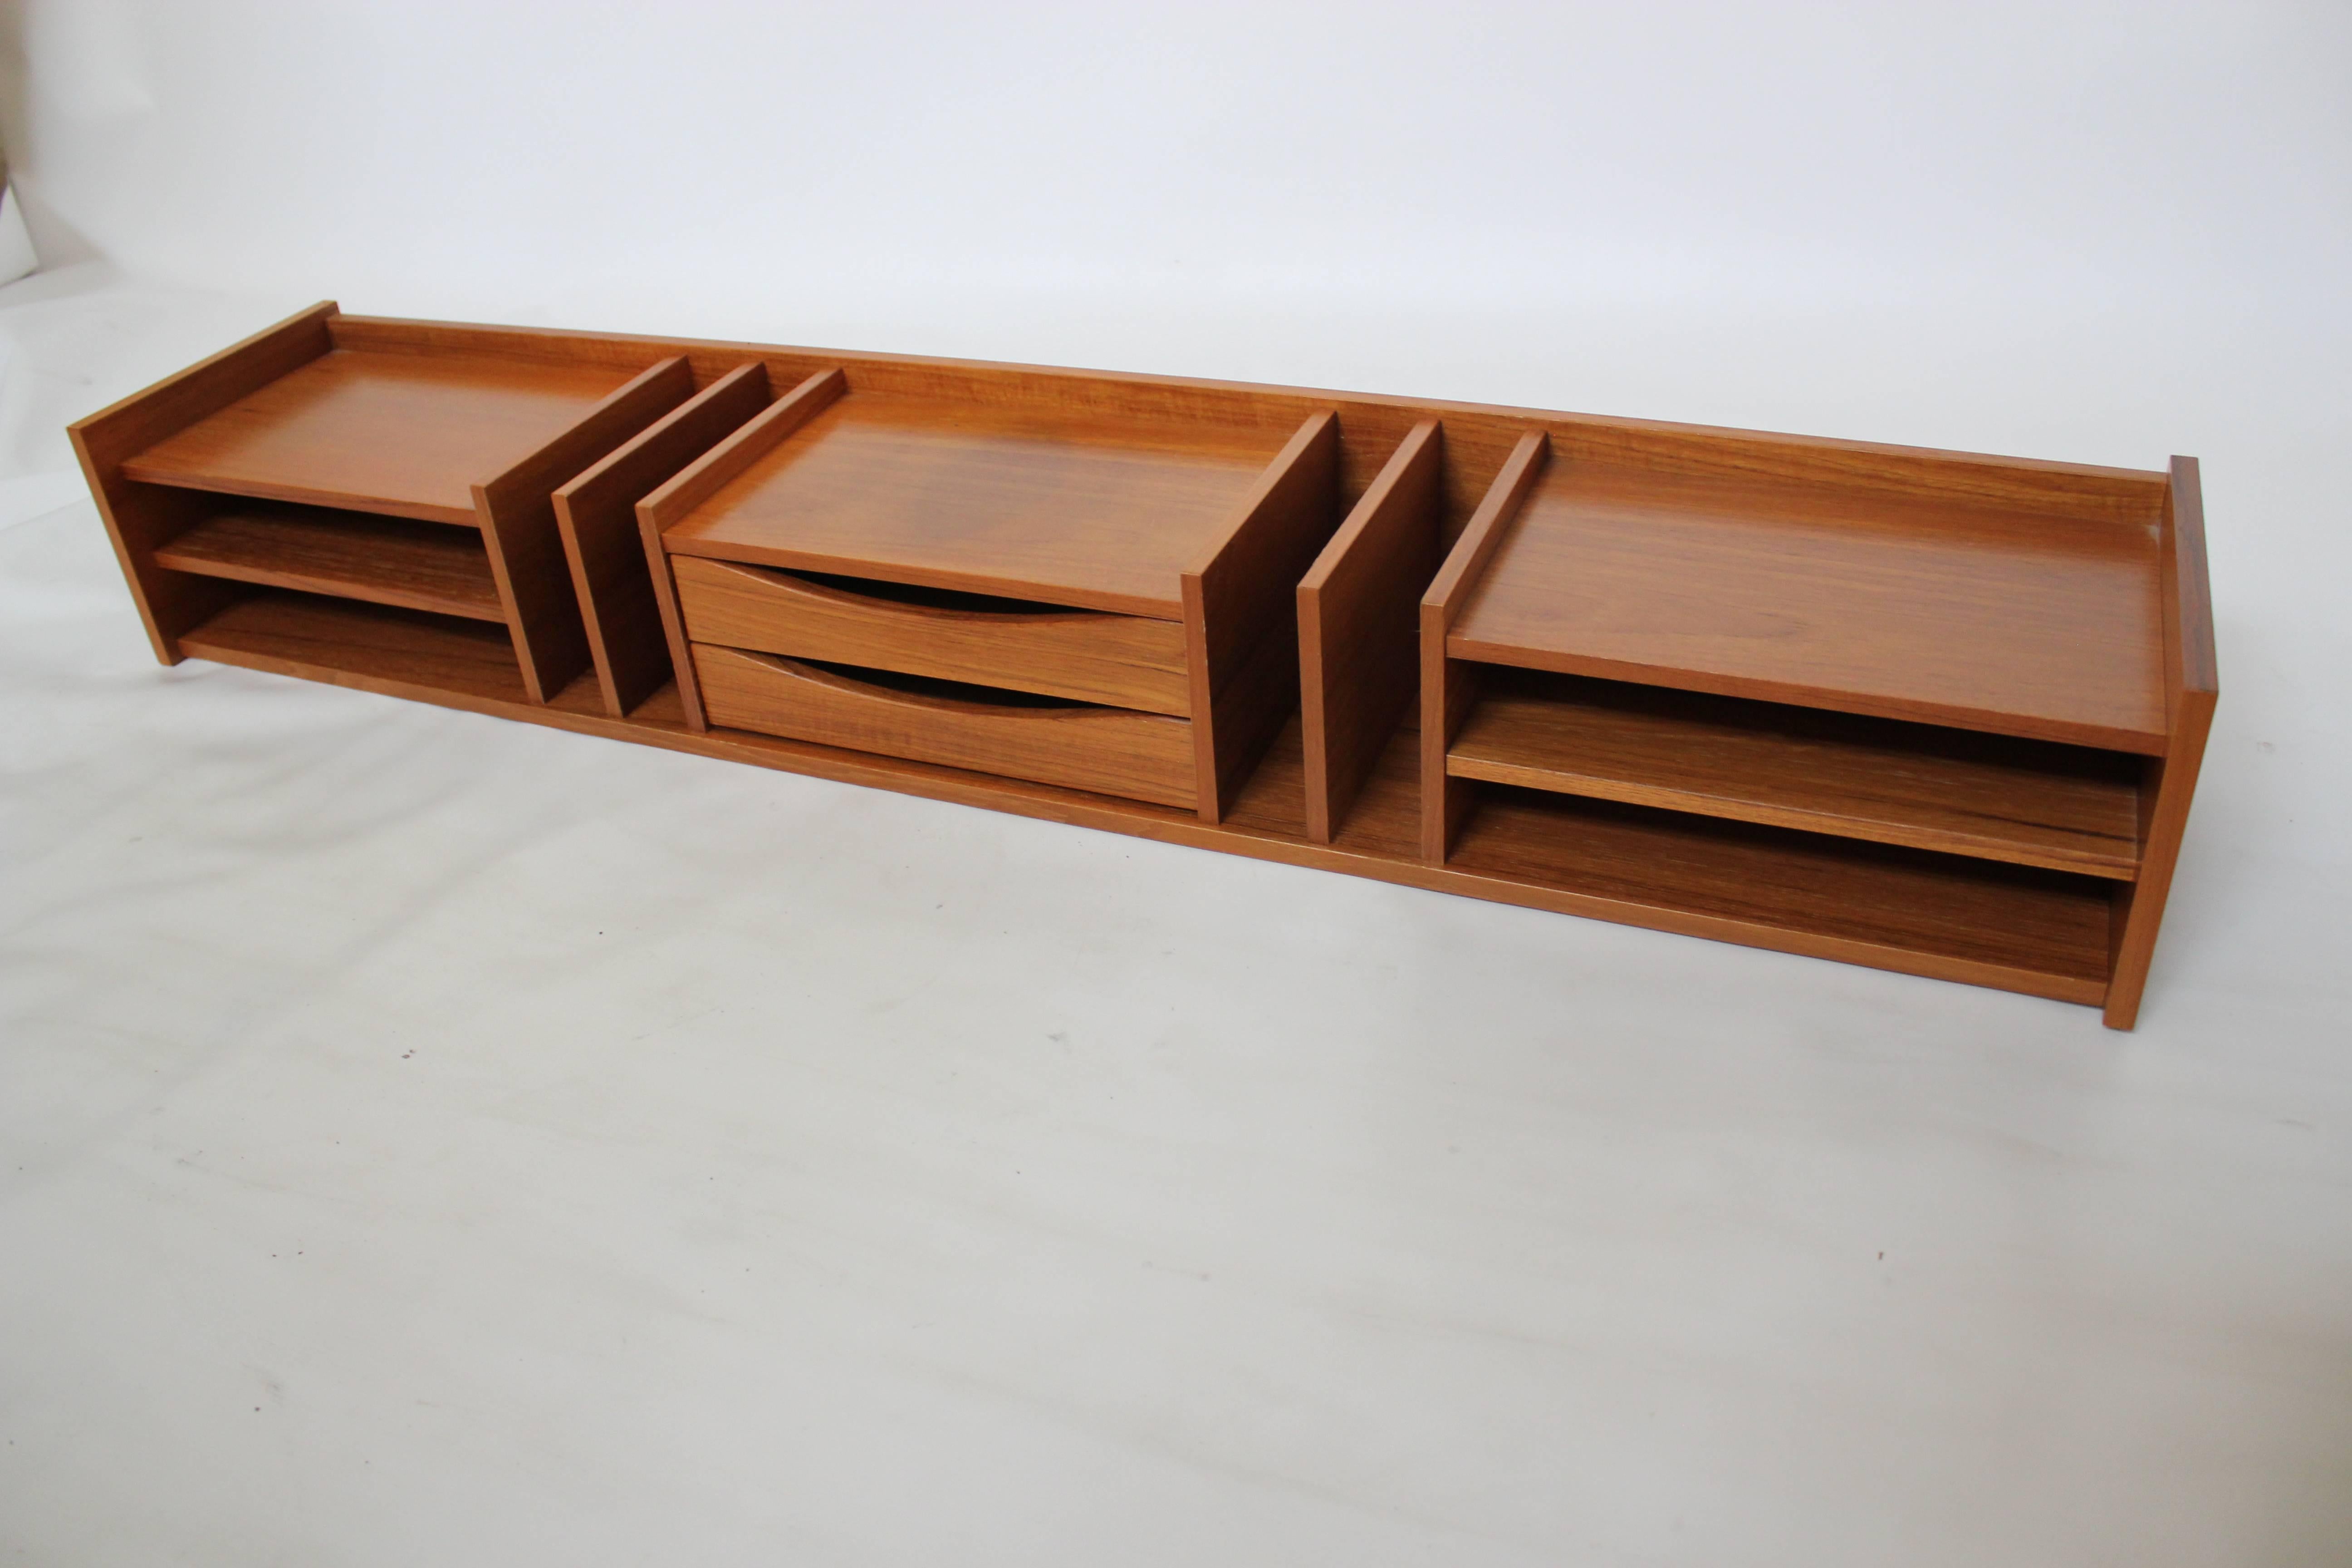 Large Danish Modern teak desk organizer by Pedersen and Hansen, with two drawers and multiple cubbies and slots for organization. Marked 